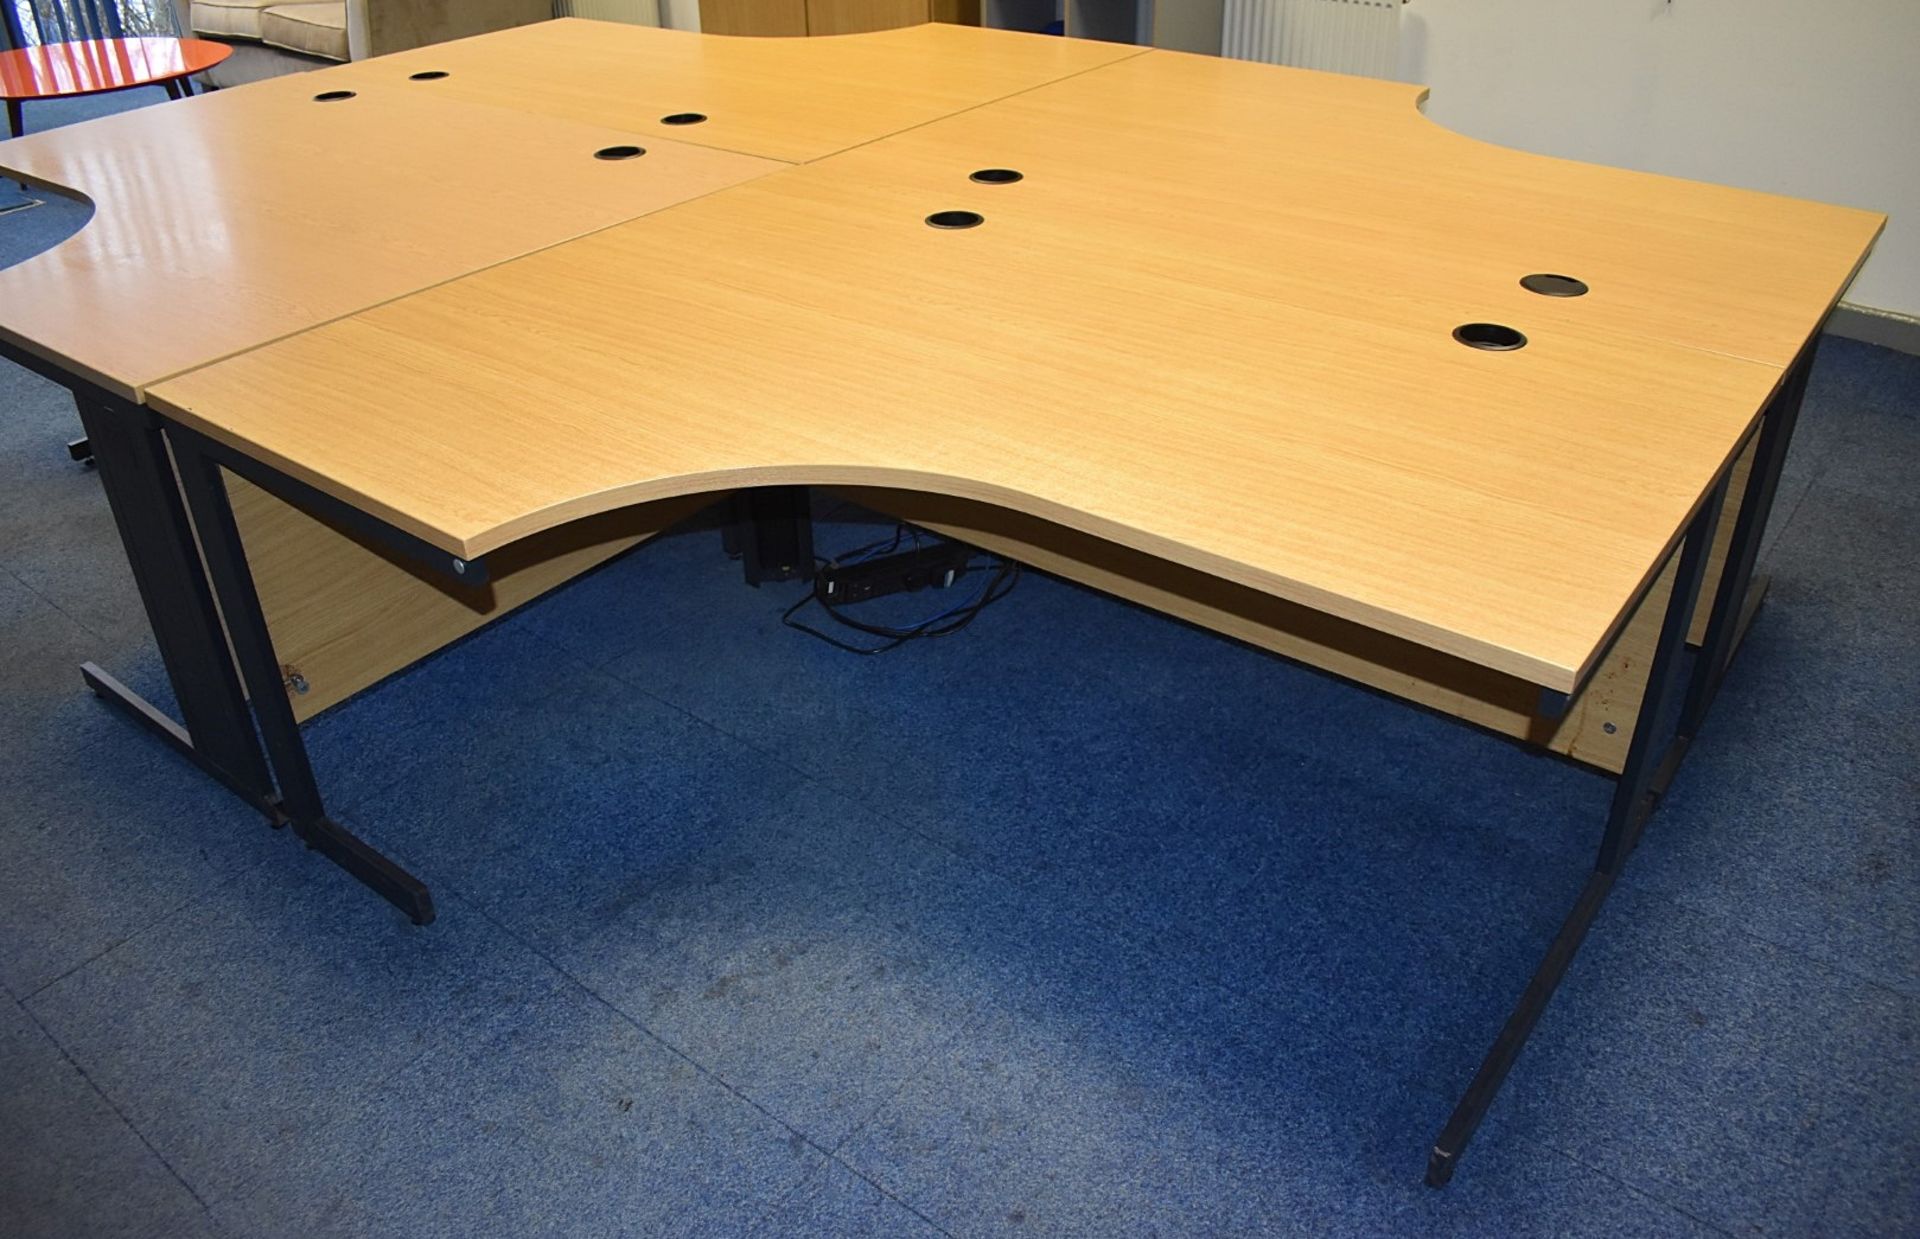 4 x Office Desks With Light Wood Finish - Includes Left and Right Hand - 160 x 120 cms - Ref FE245 - Image 2 of 2